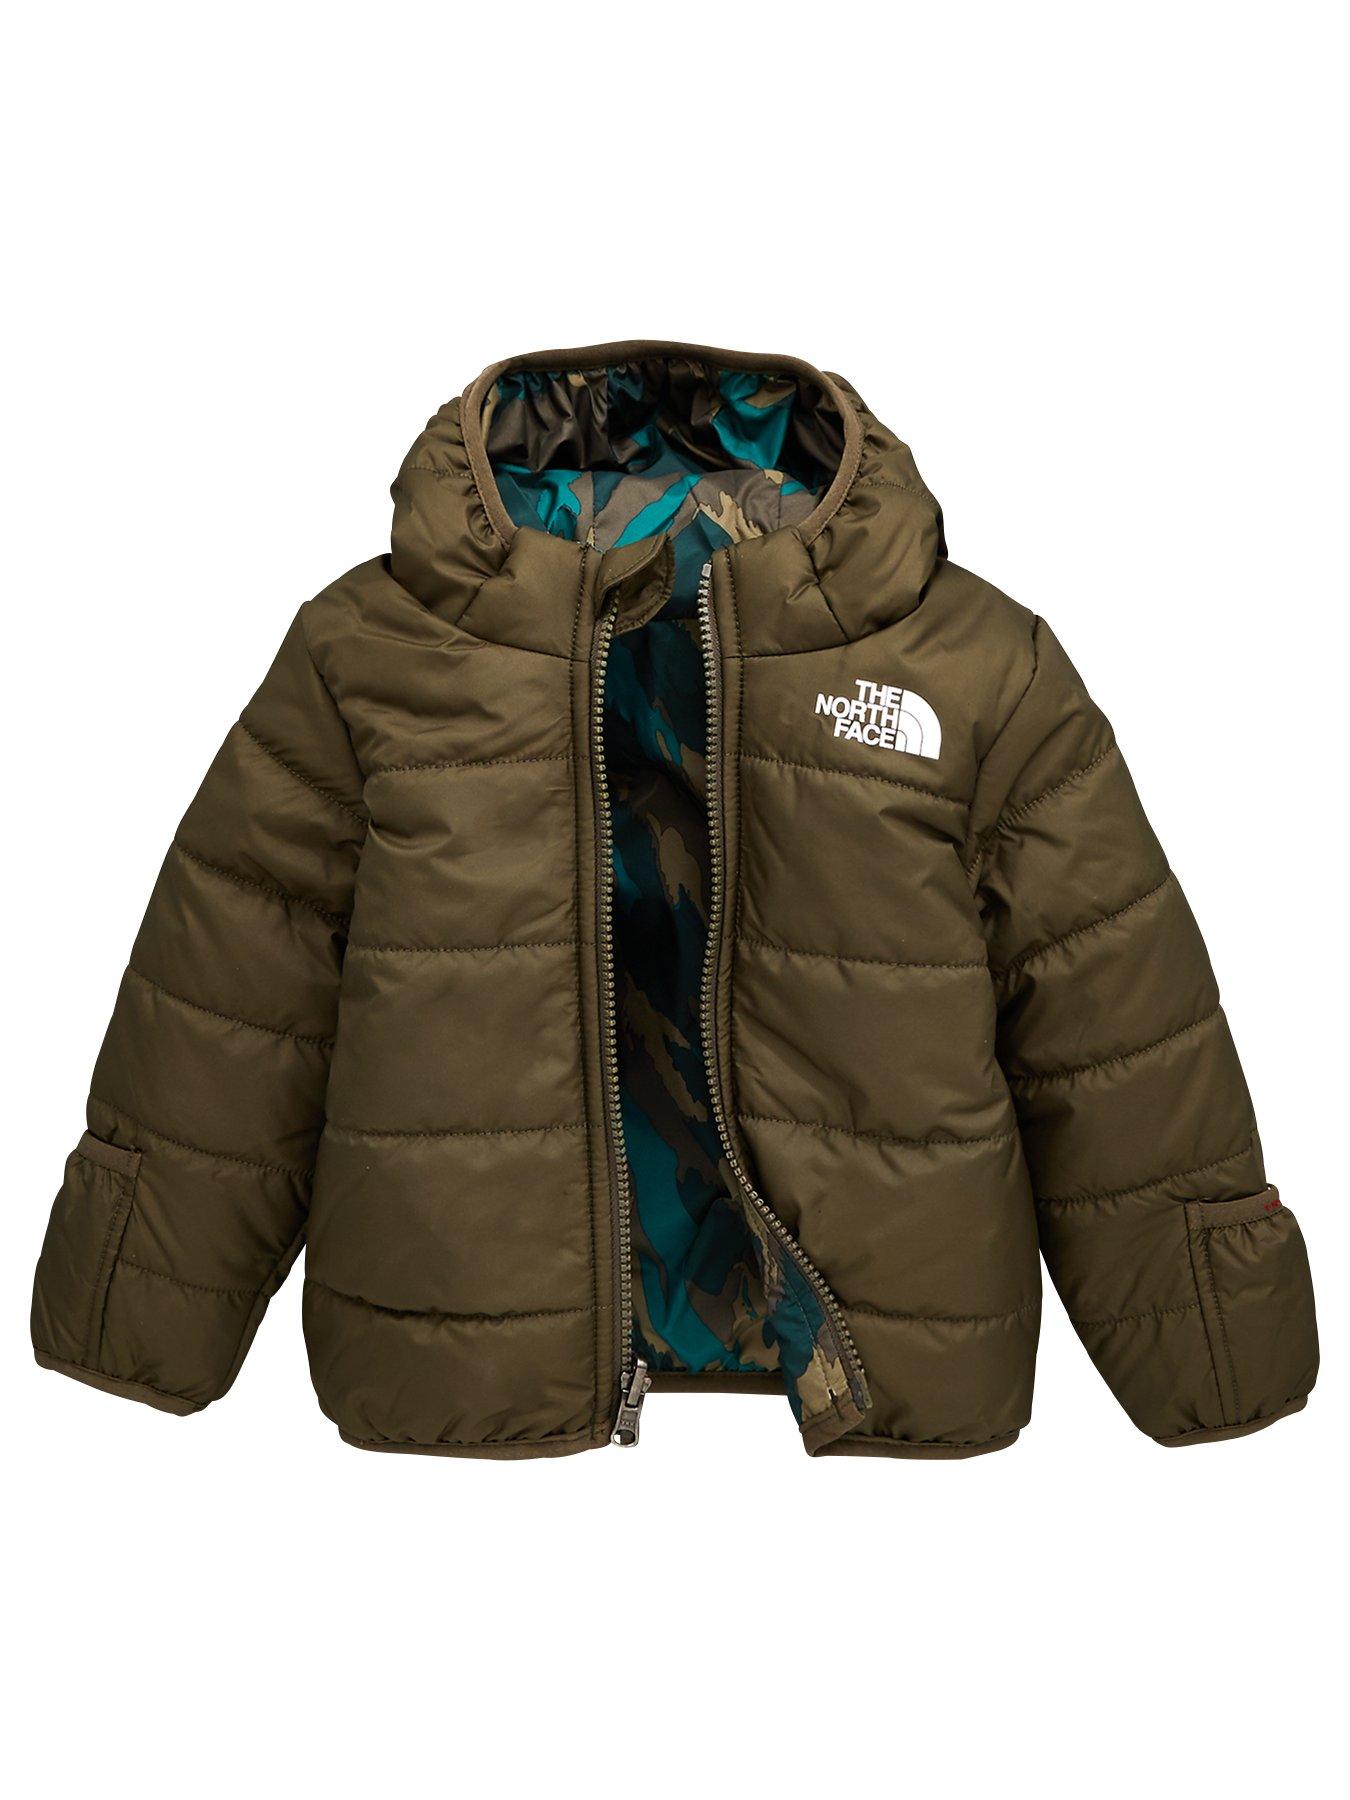 the north face baby coat